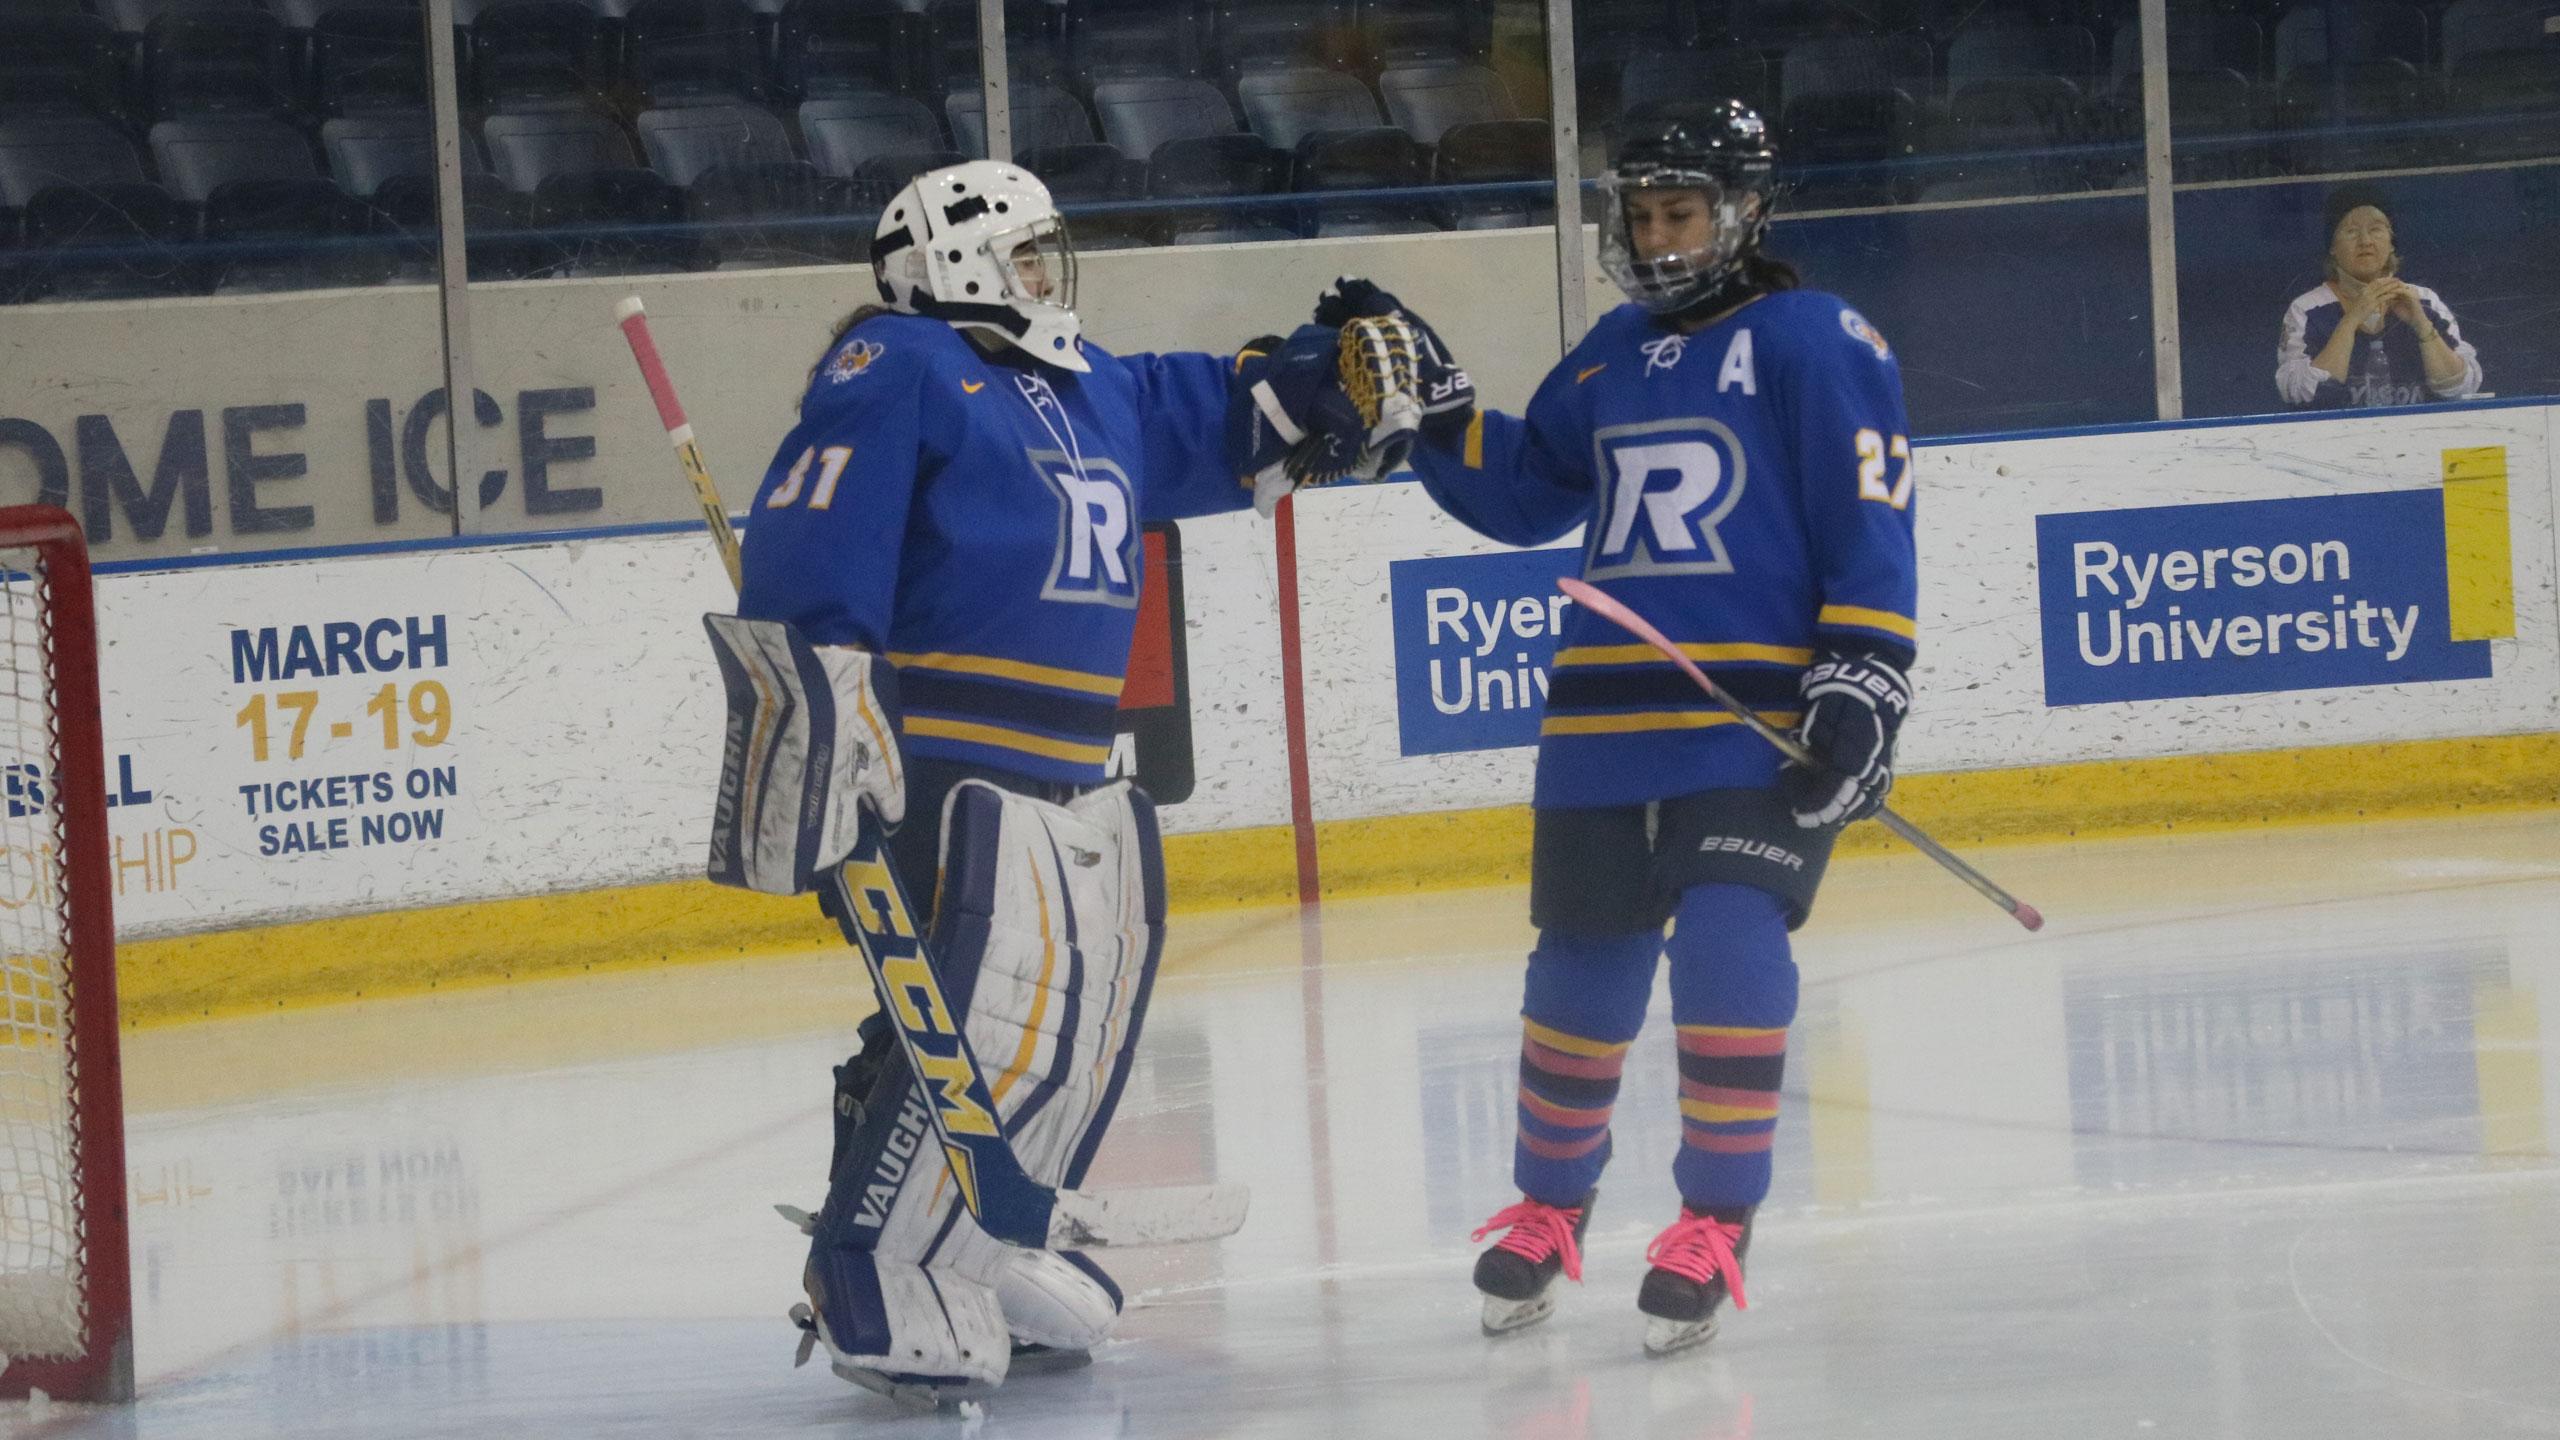 Two ryerson hockey players bump hands